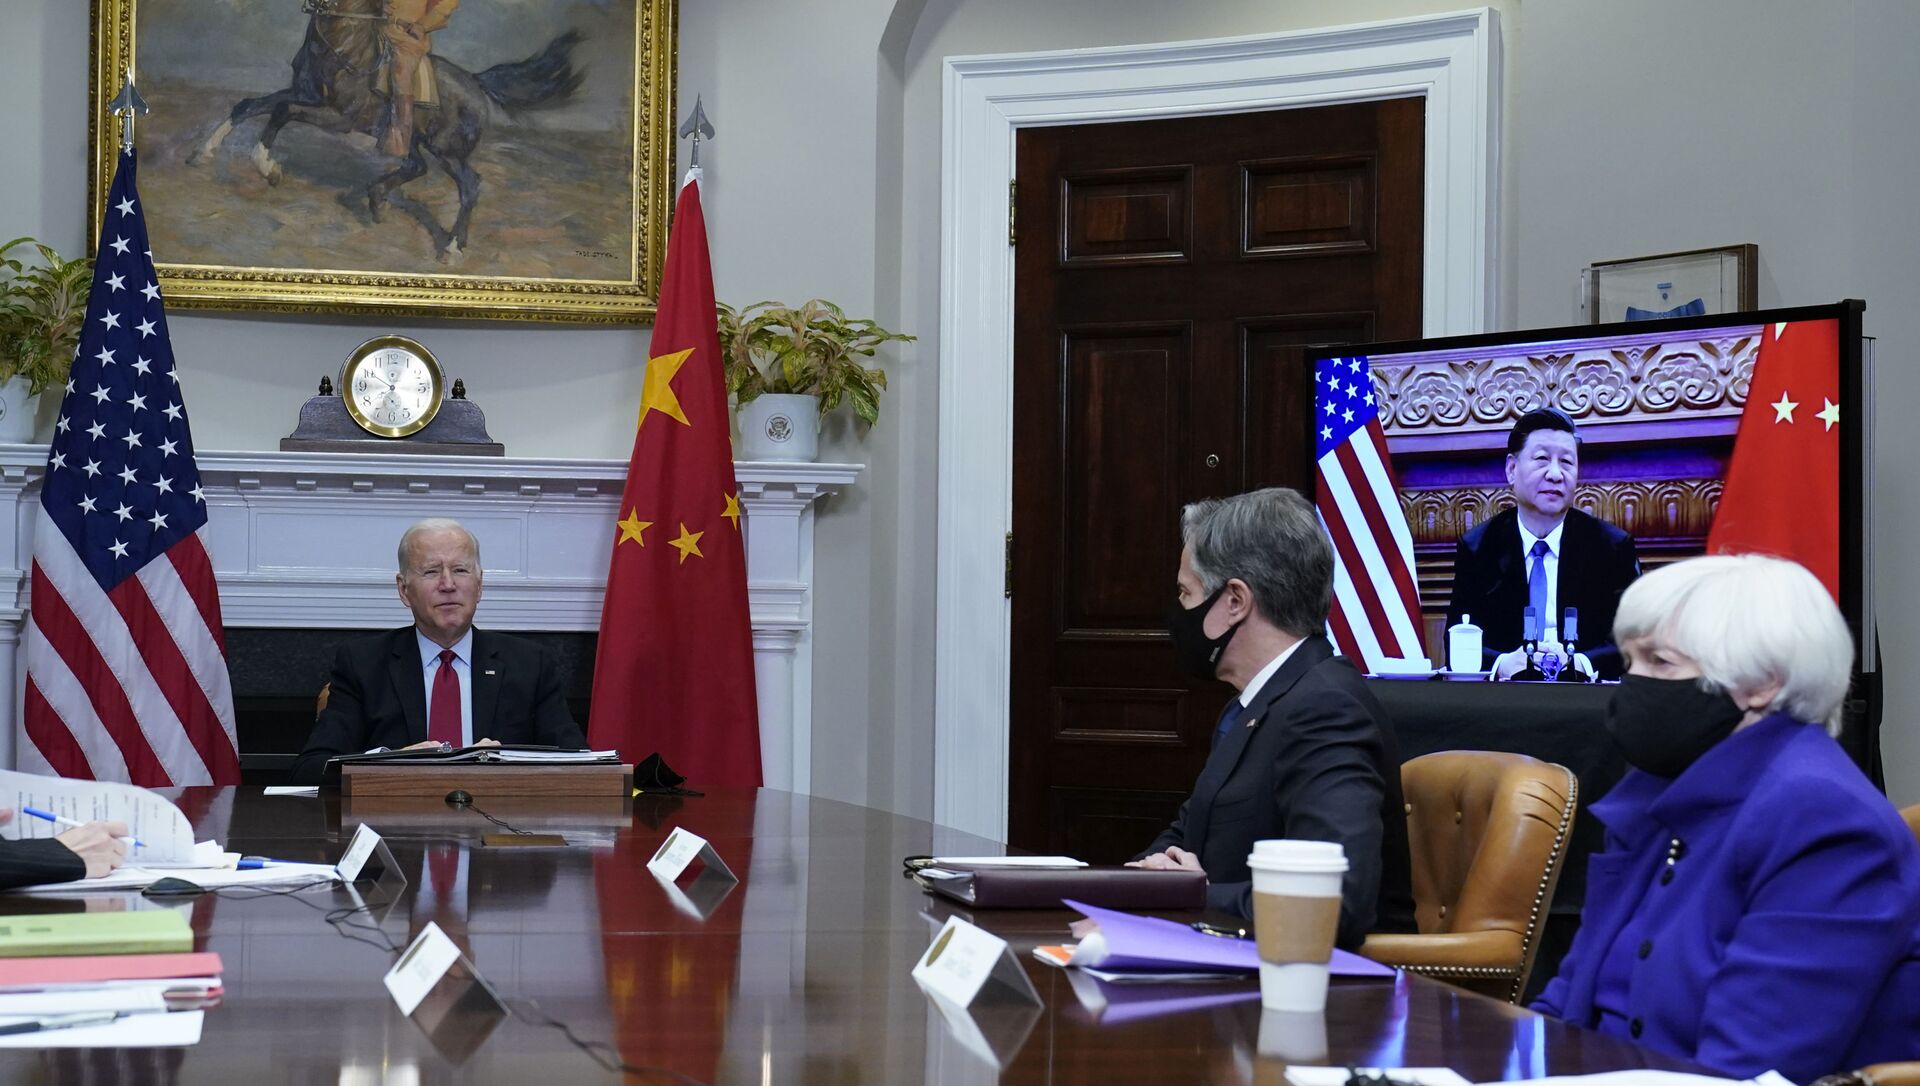 FILE - President Joe Biden speaks as he meets virtually with Chinese President Xi Jinping from the Roosevelt Room of the White House in Washington, Nov. 15, 2021. . Secretary of State Antony Blinken, center, and Treasury Secretary Janet Yellen, right, also participated in the meeting,  The Biden administration has invited Taiwan to its upcoming Summit for Democracy, prompting sharp criticism from China, which considers the self-ruled island as its territory. The invitation list features 110 countries, including Taiwan, but does not include China or Russia.  (AP Photo/Susan Walsh, File) - 俄罗斯卫星通讯社, 1920, 25.11.2021